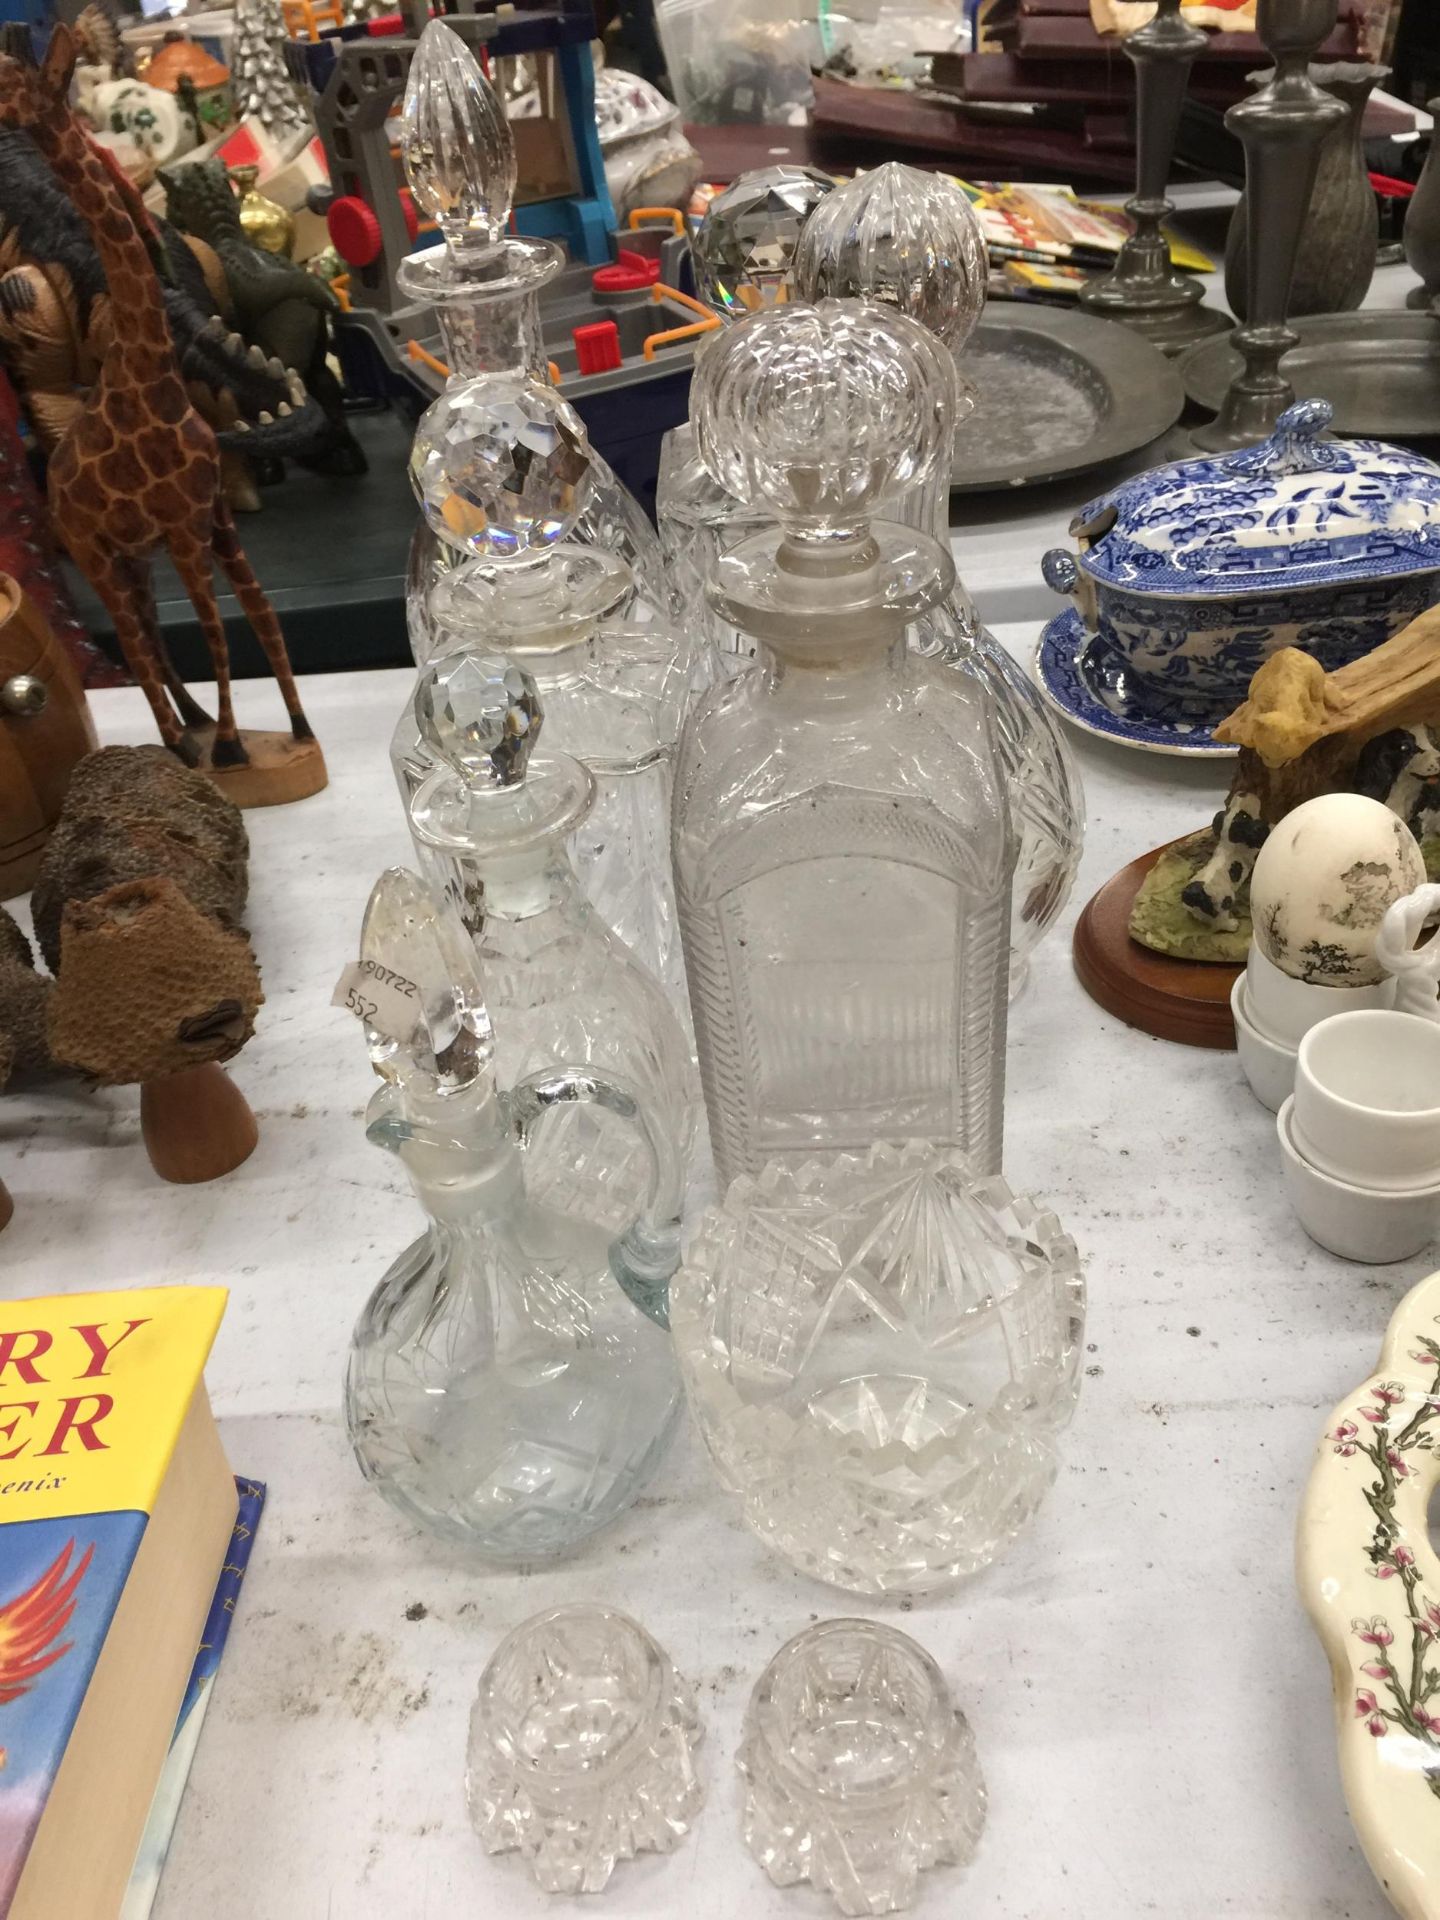 A QUANTITY OF GLASSWARE DECANTERS PLUS AN OIL BOTTLE AND TEALIGHT HOLDERS